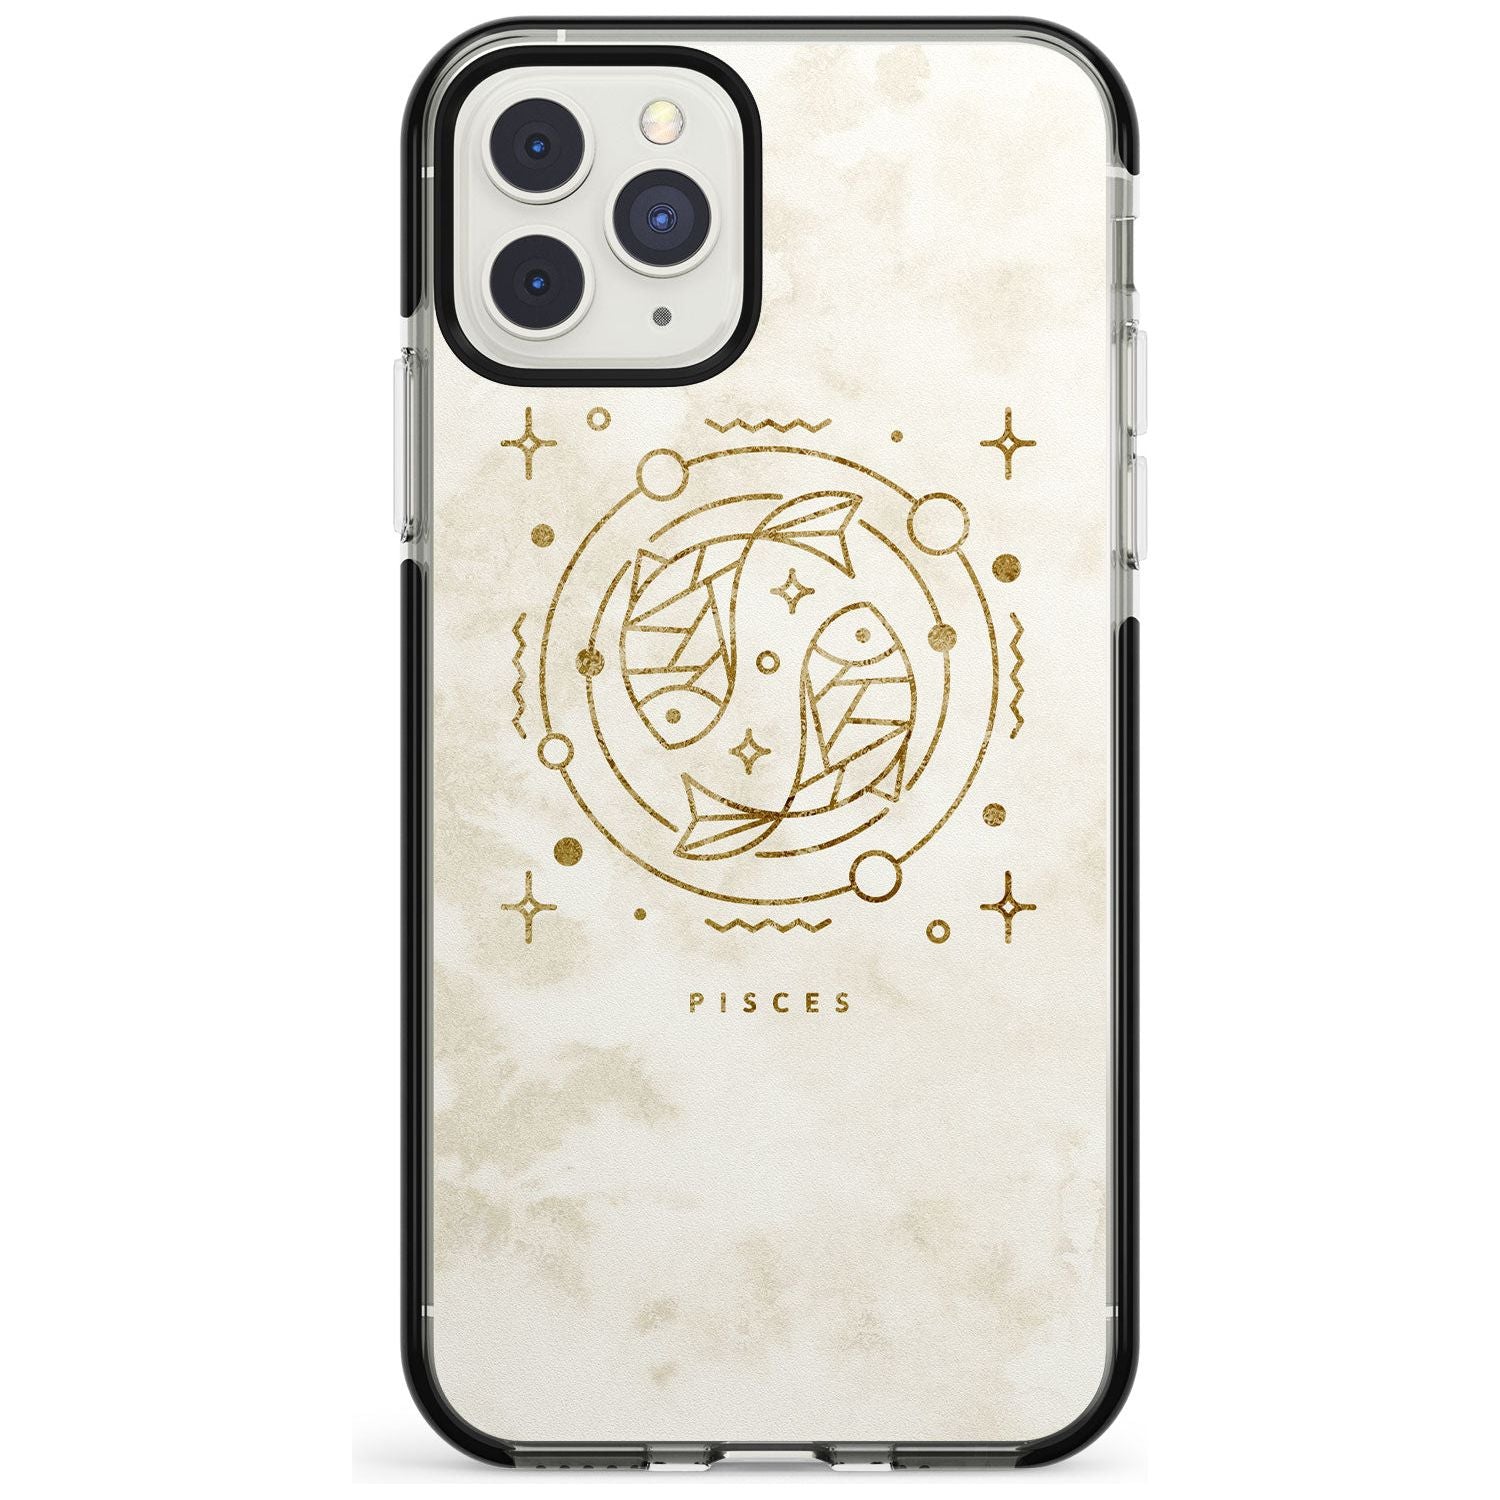 Pisces Emblem - Solid Gold Marbled Design Black Impact Phone Case for iPhone 11 Pro Max